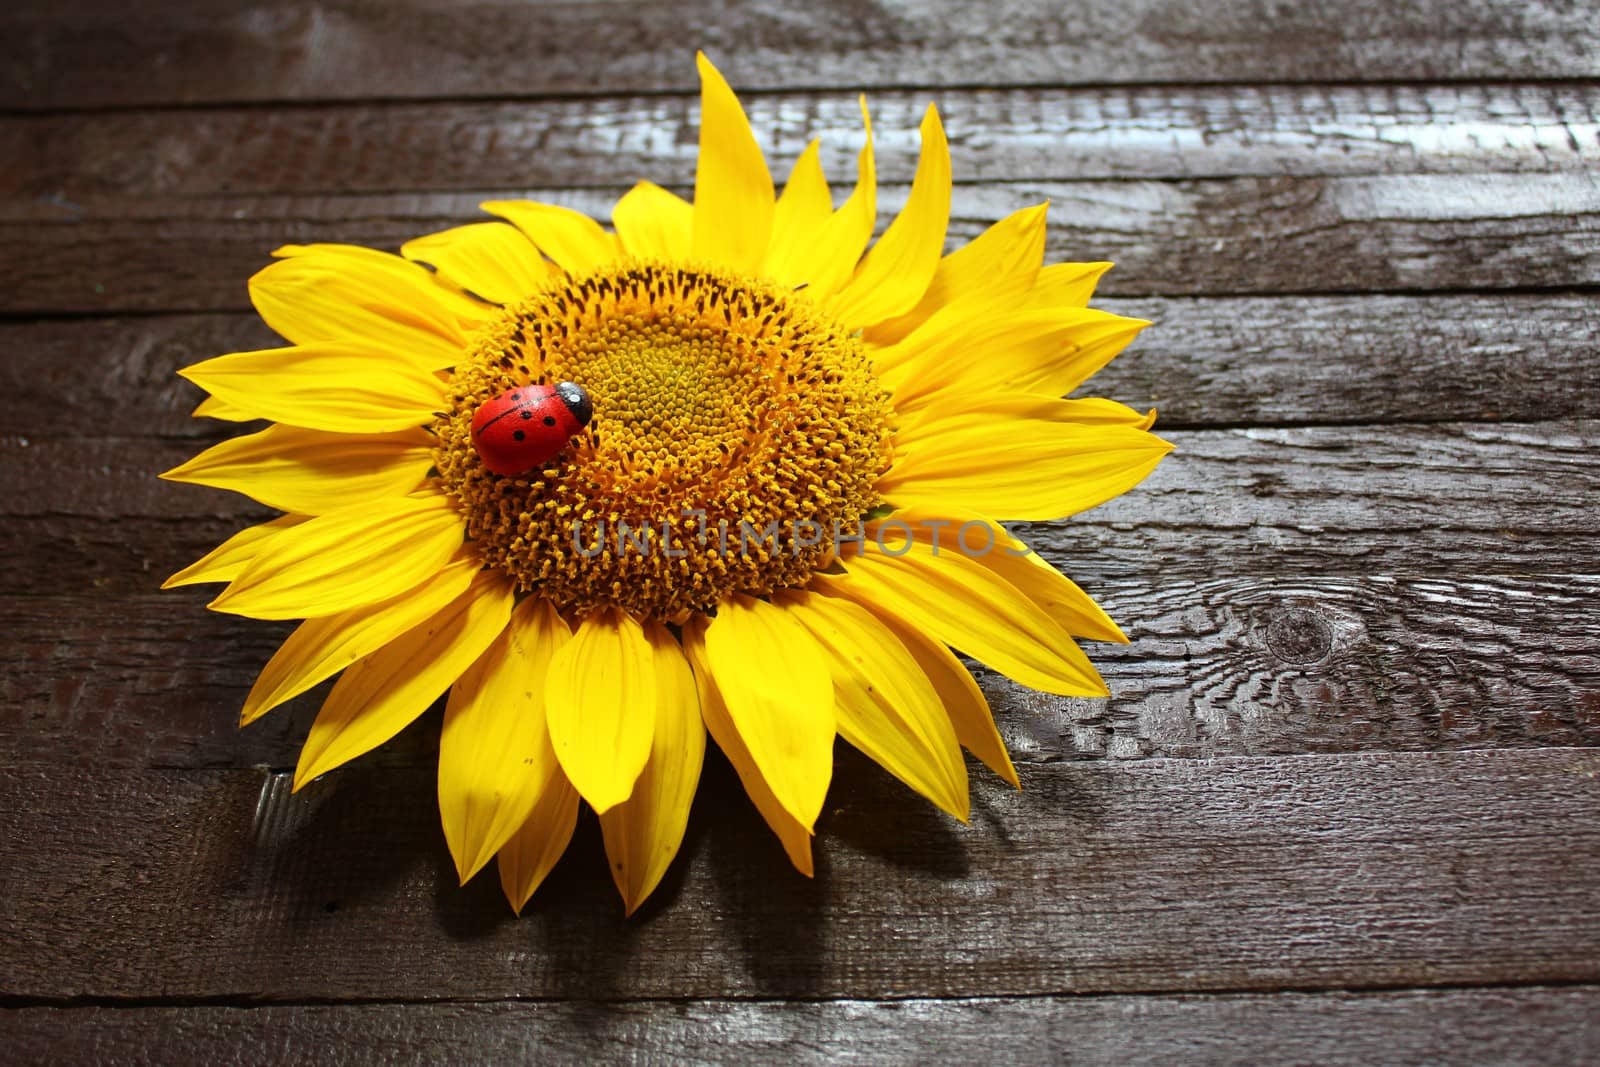 The picture shows a sunflower on wooden boards.